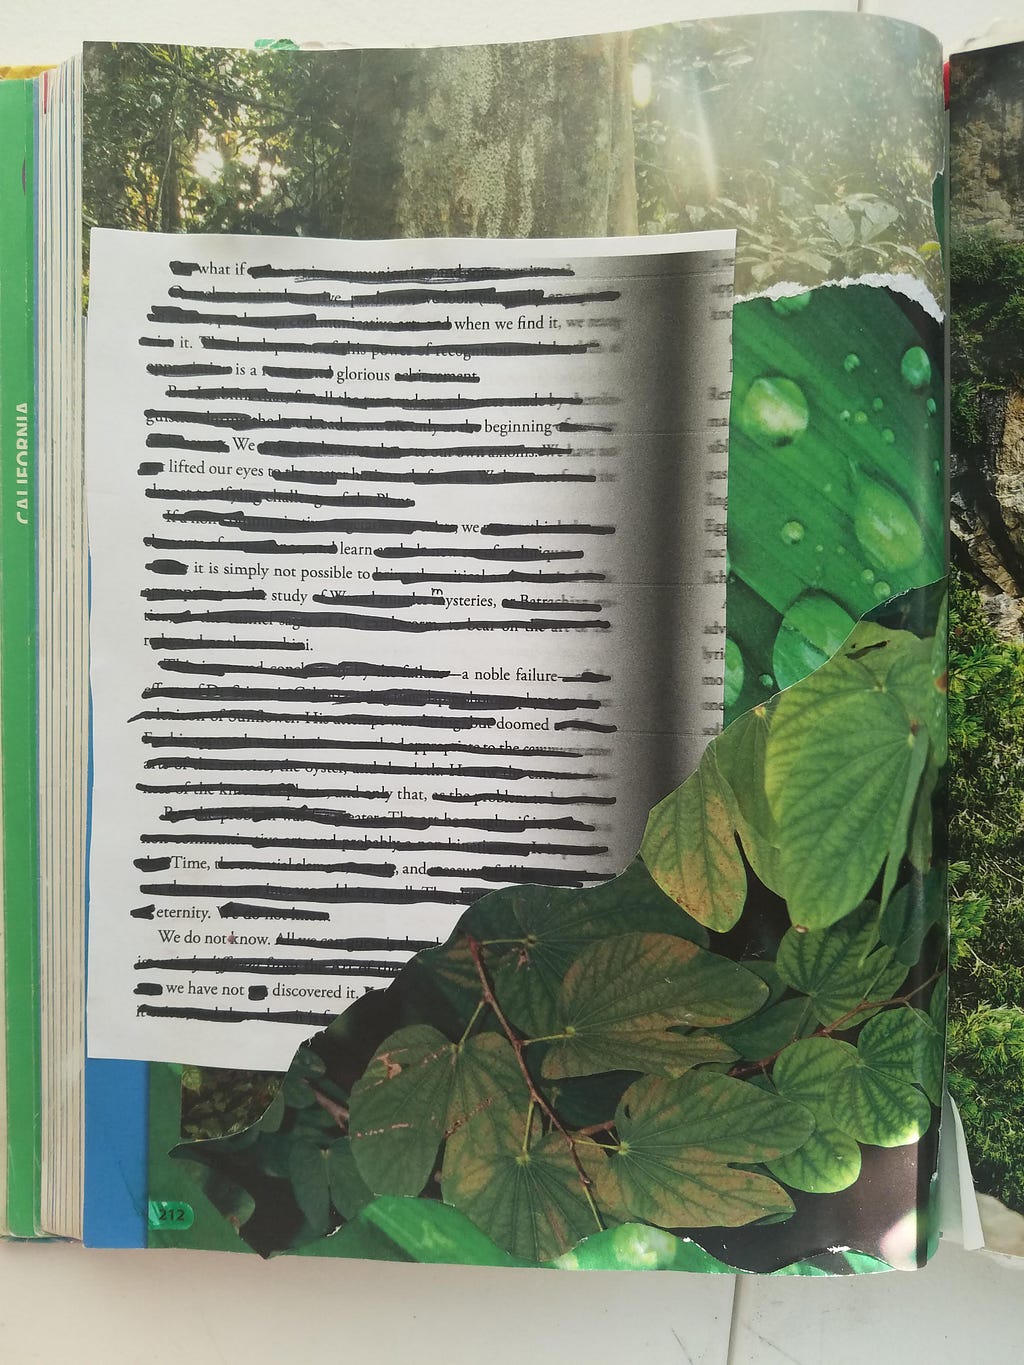 A blackout poem written on white paper with green pictures of leaves collaged around it.